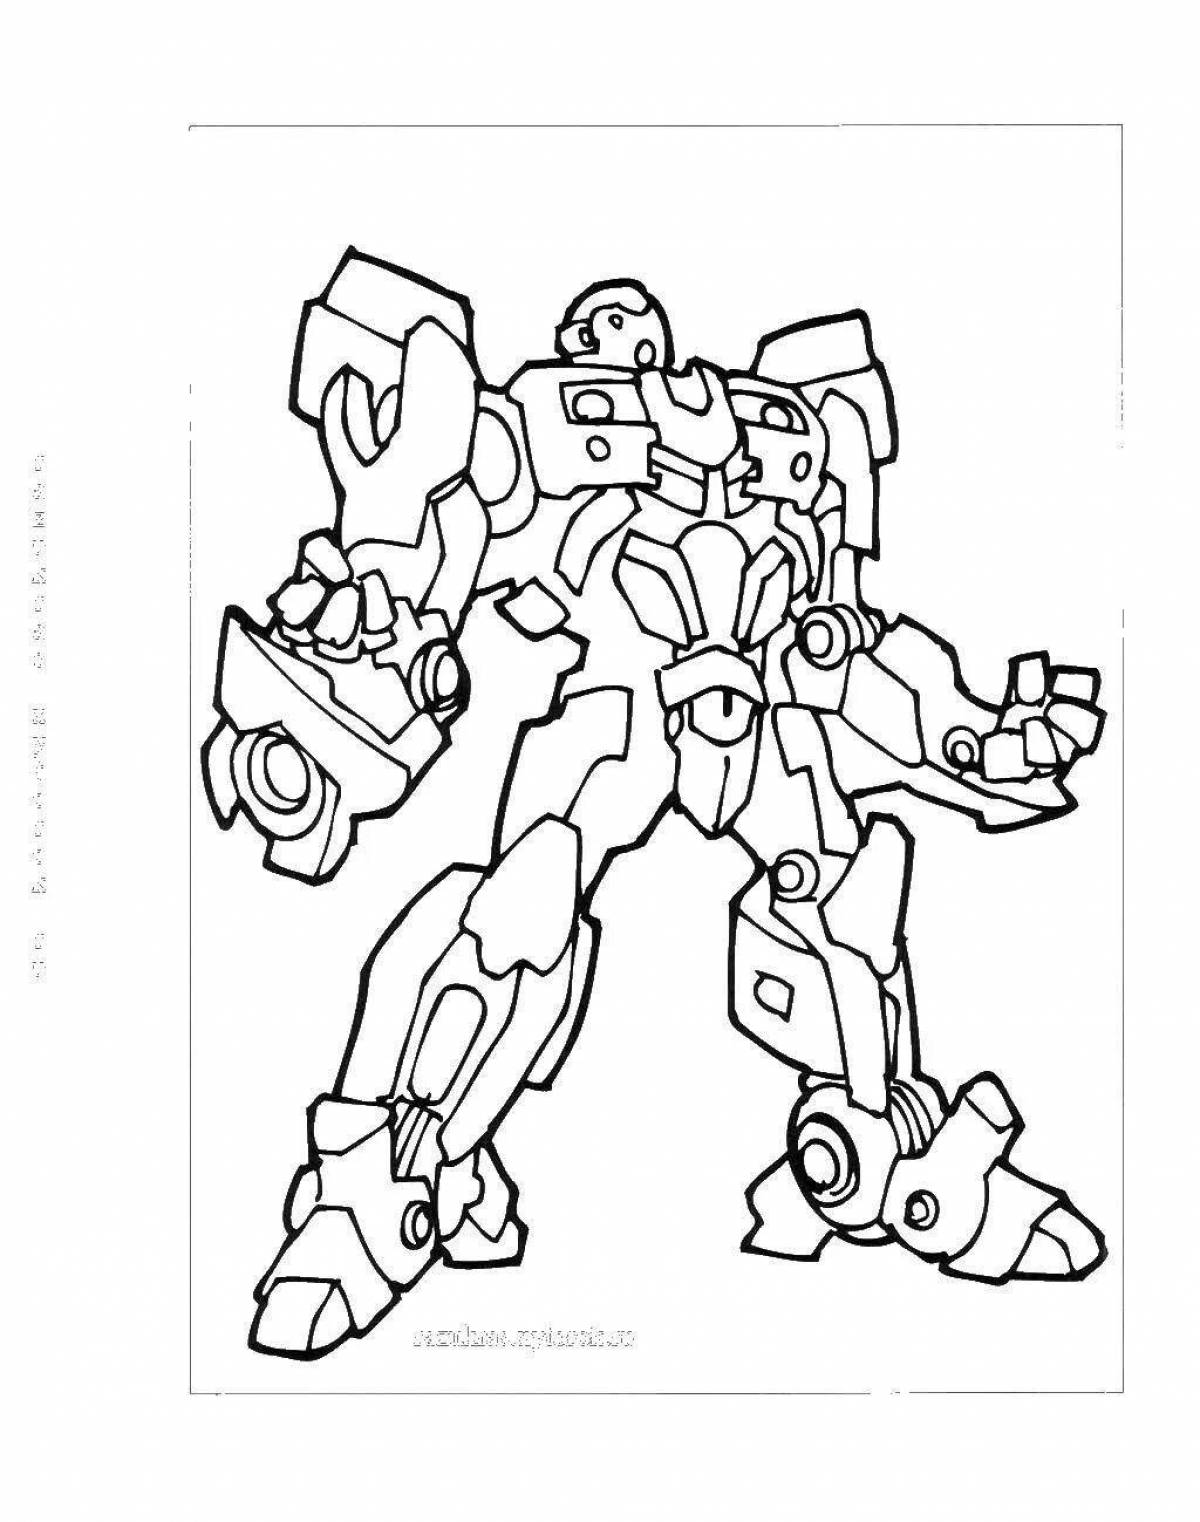 Amazing magma coloring page